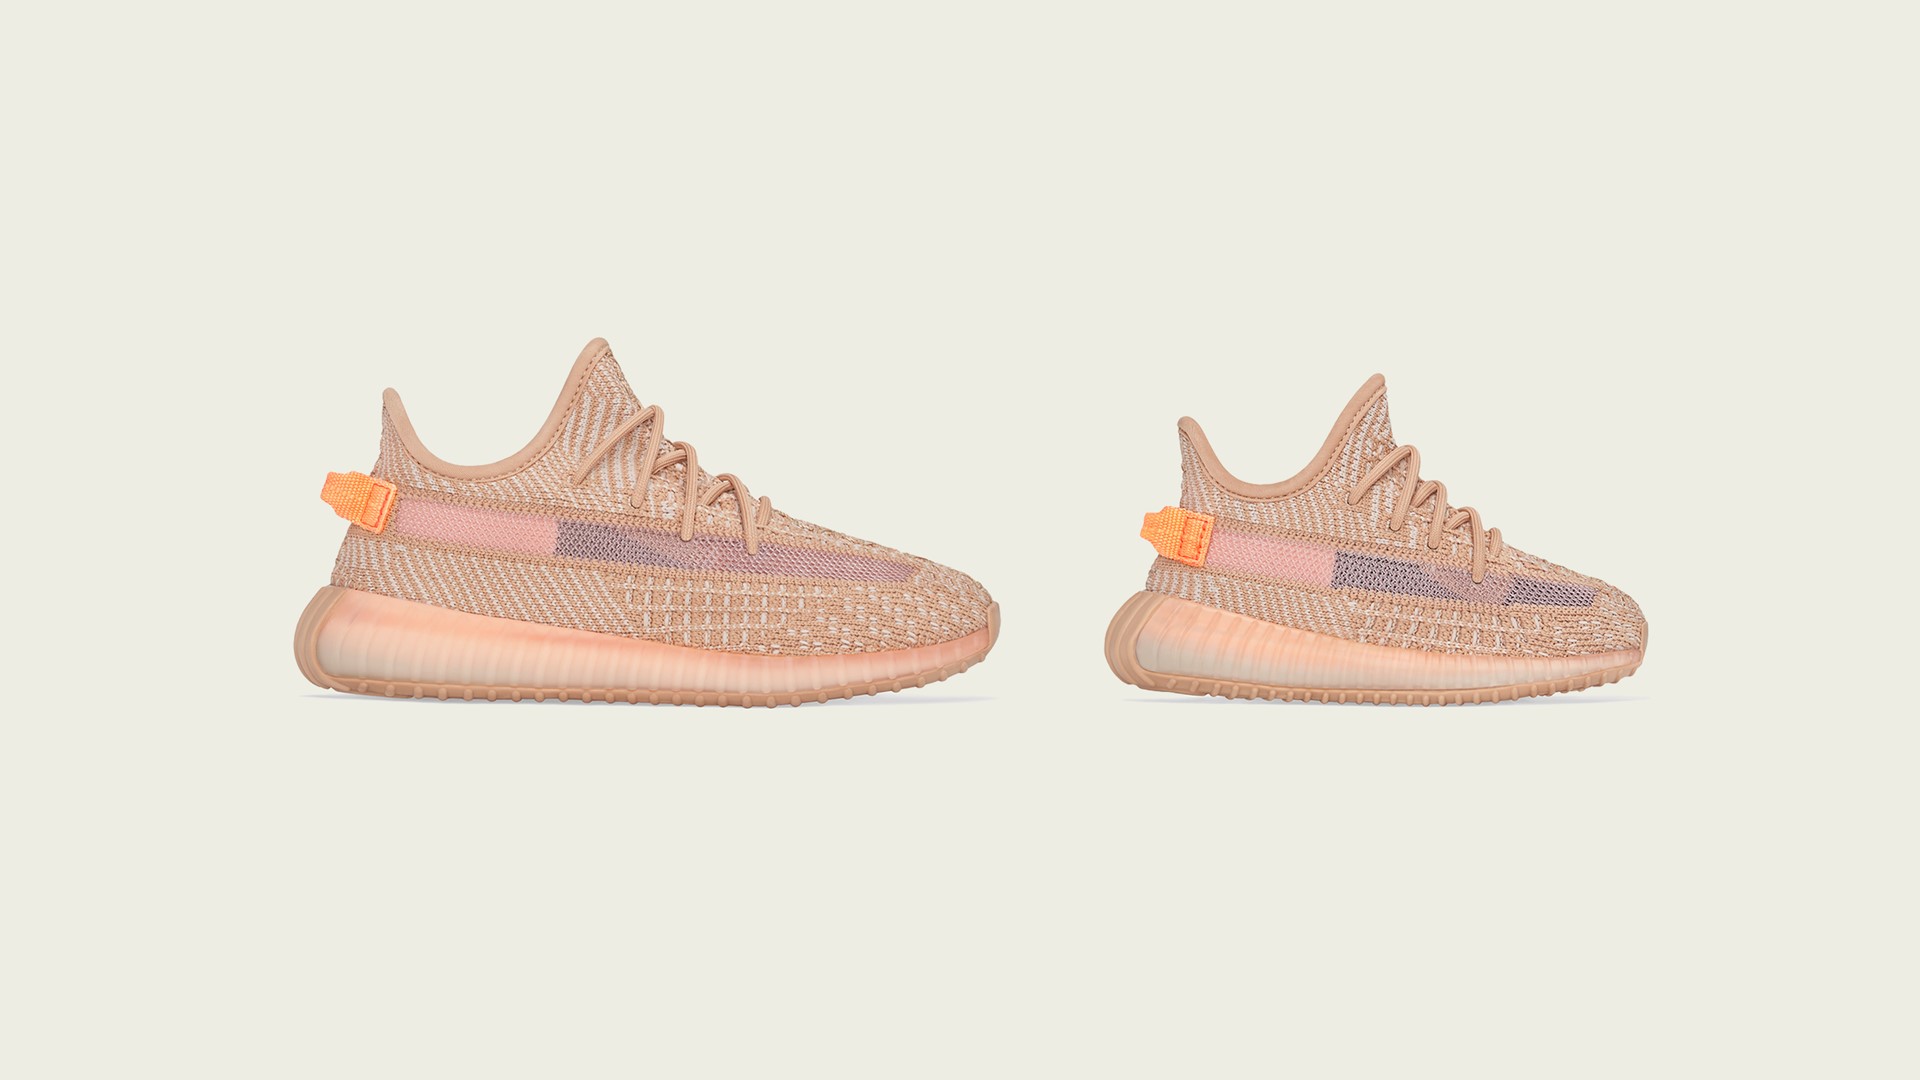 adidas + KANYE WEST announce the YEEZY BOOST 350 V2 Clay